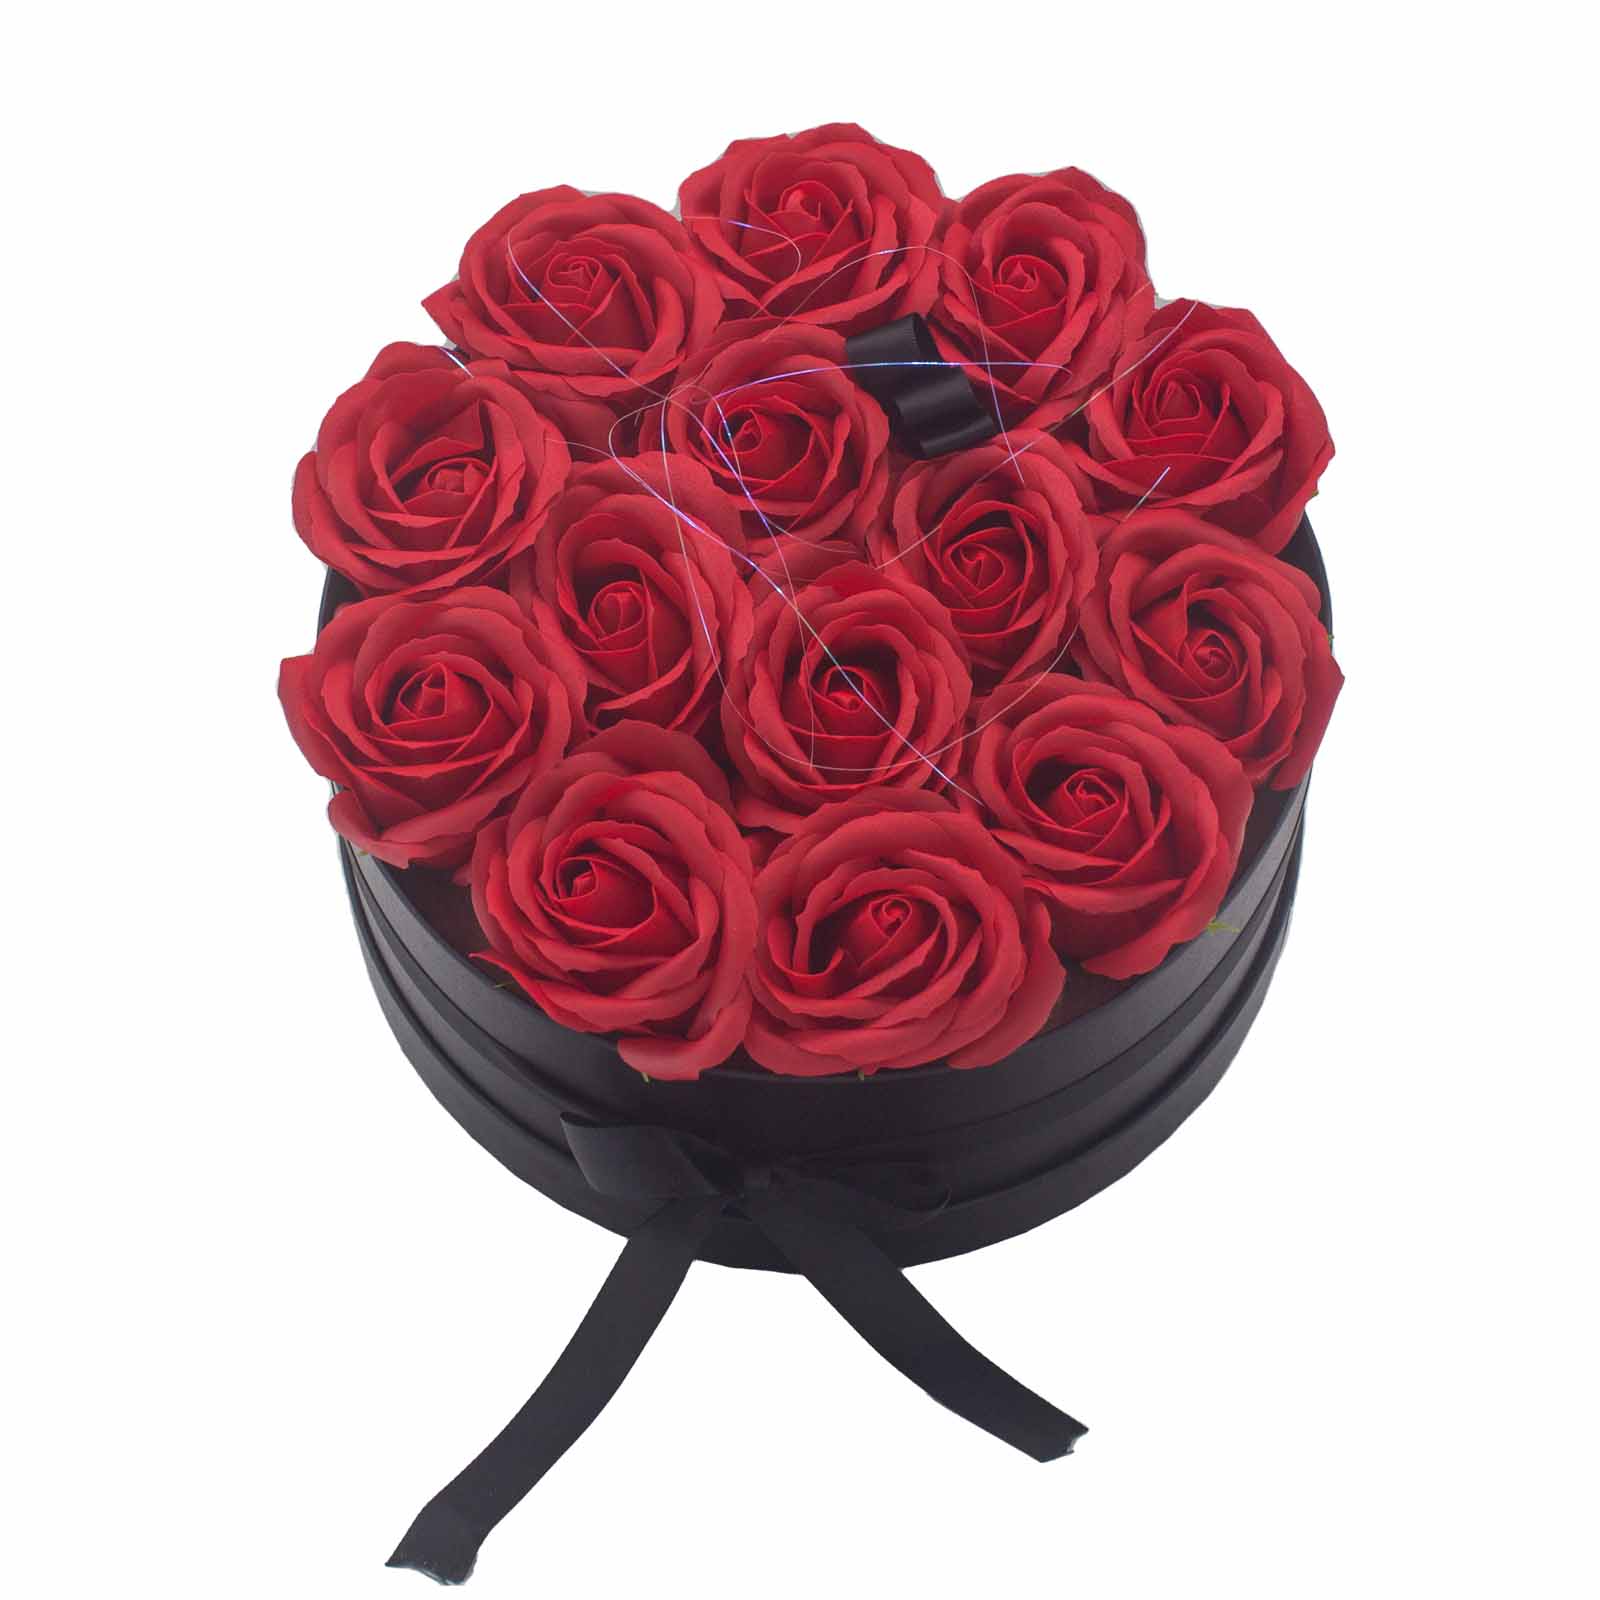 View Soap Flower Gift Bouquet 14 Red Roses Round information